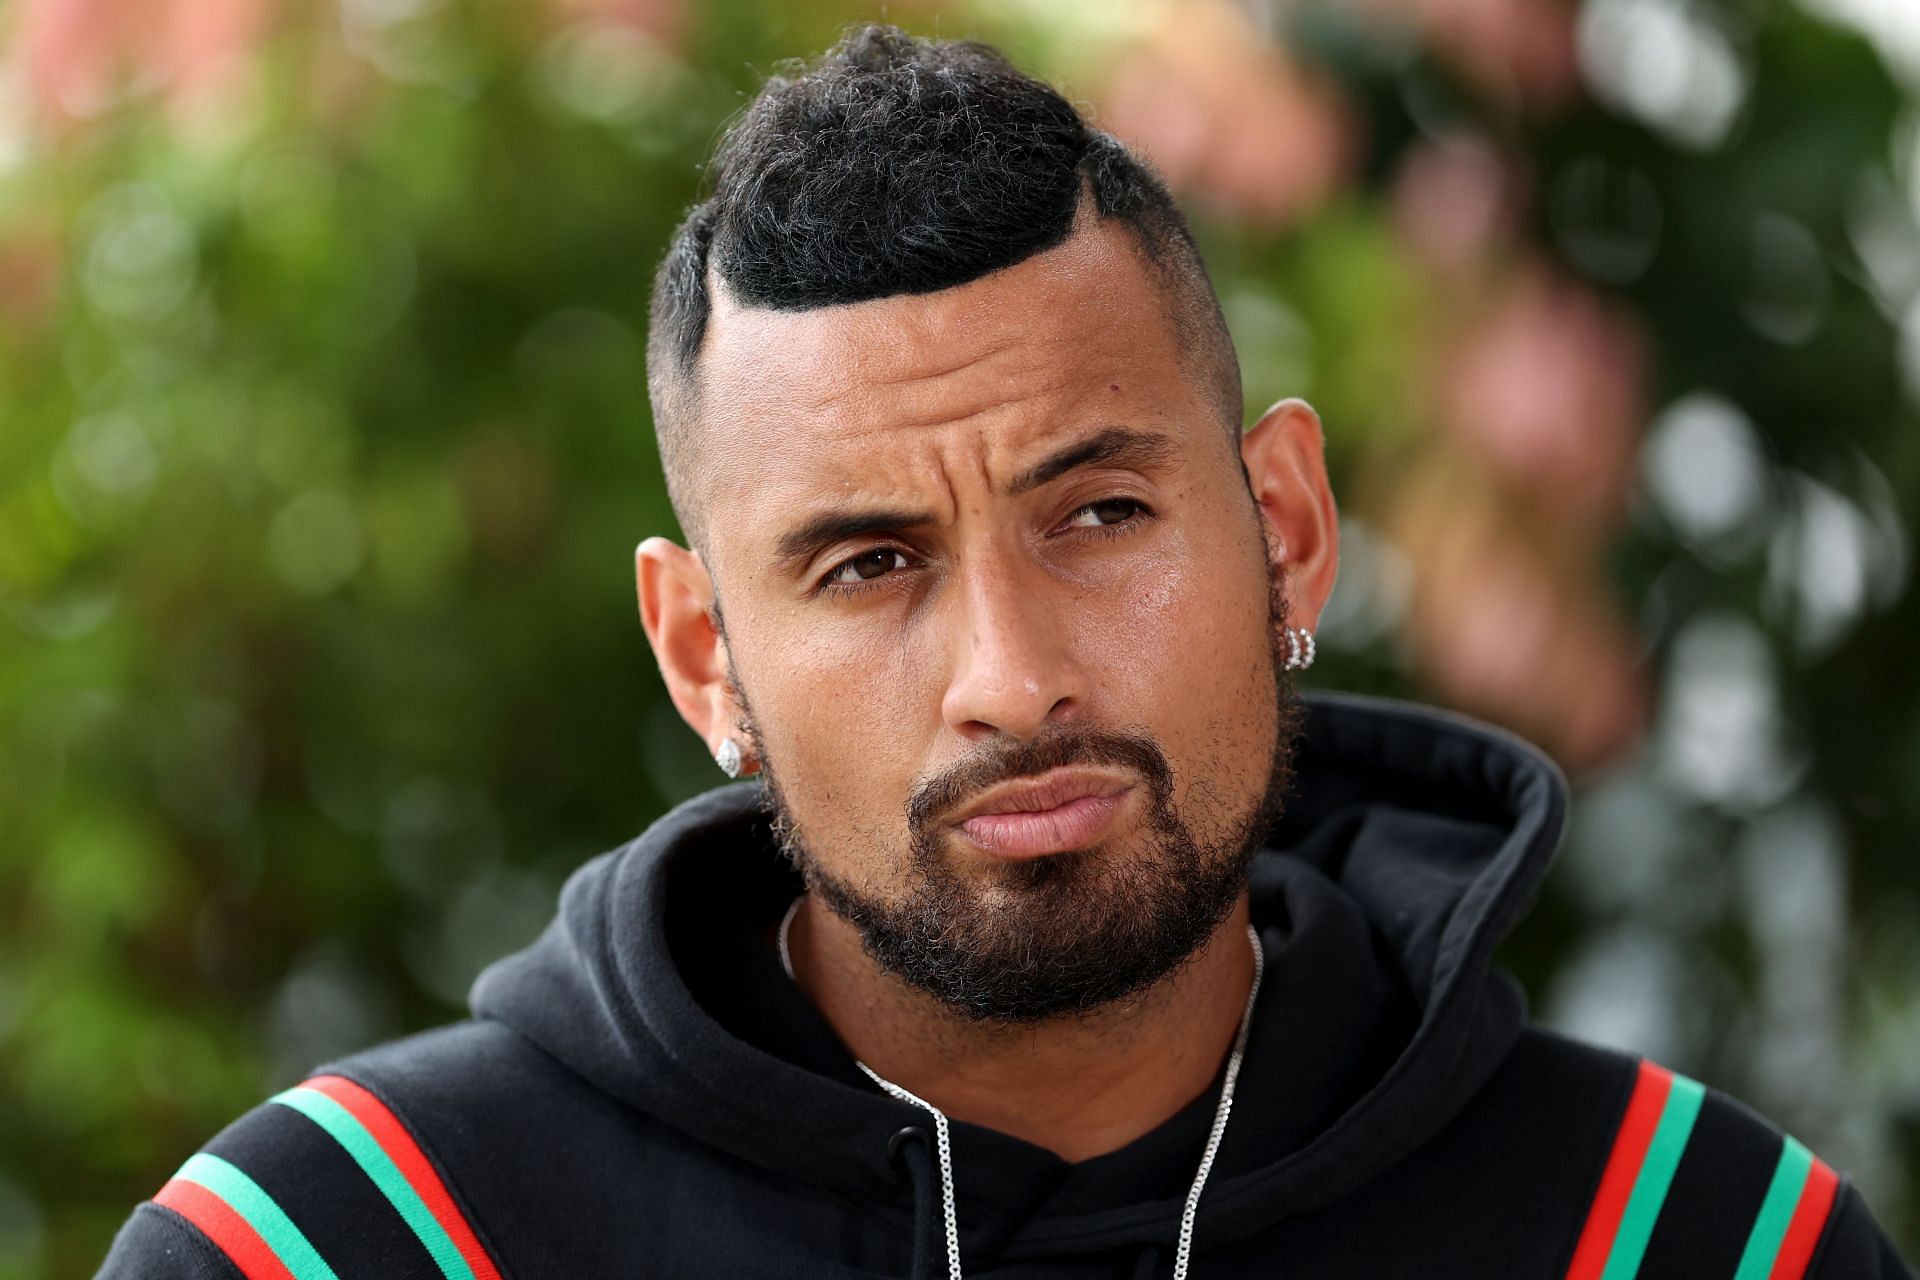 Nick Kyrgios did not want to prioritize his tennis career over the rest of his life